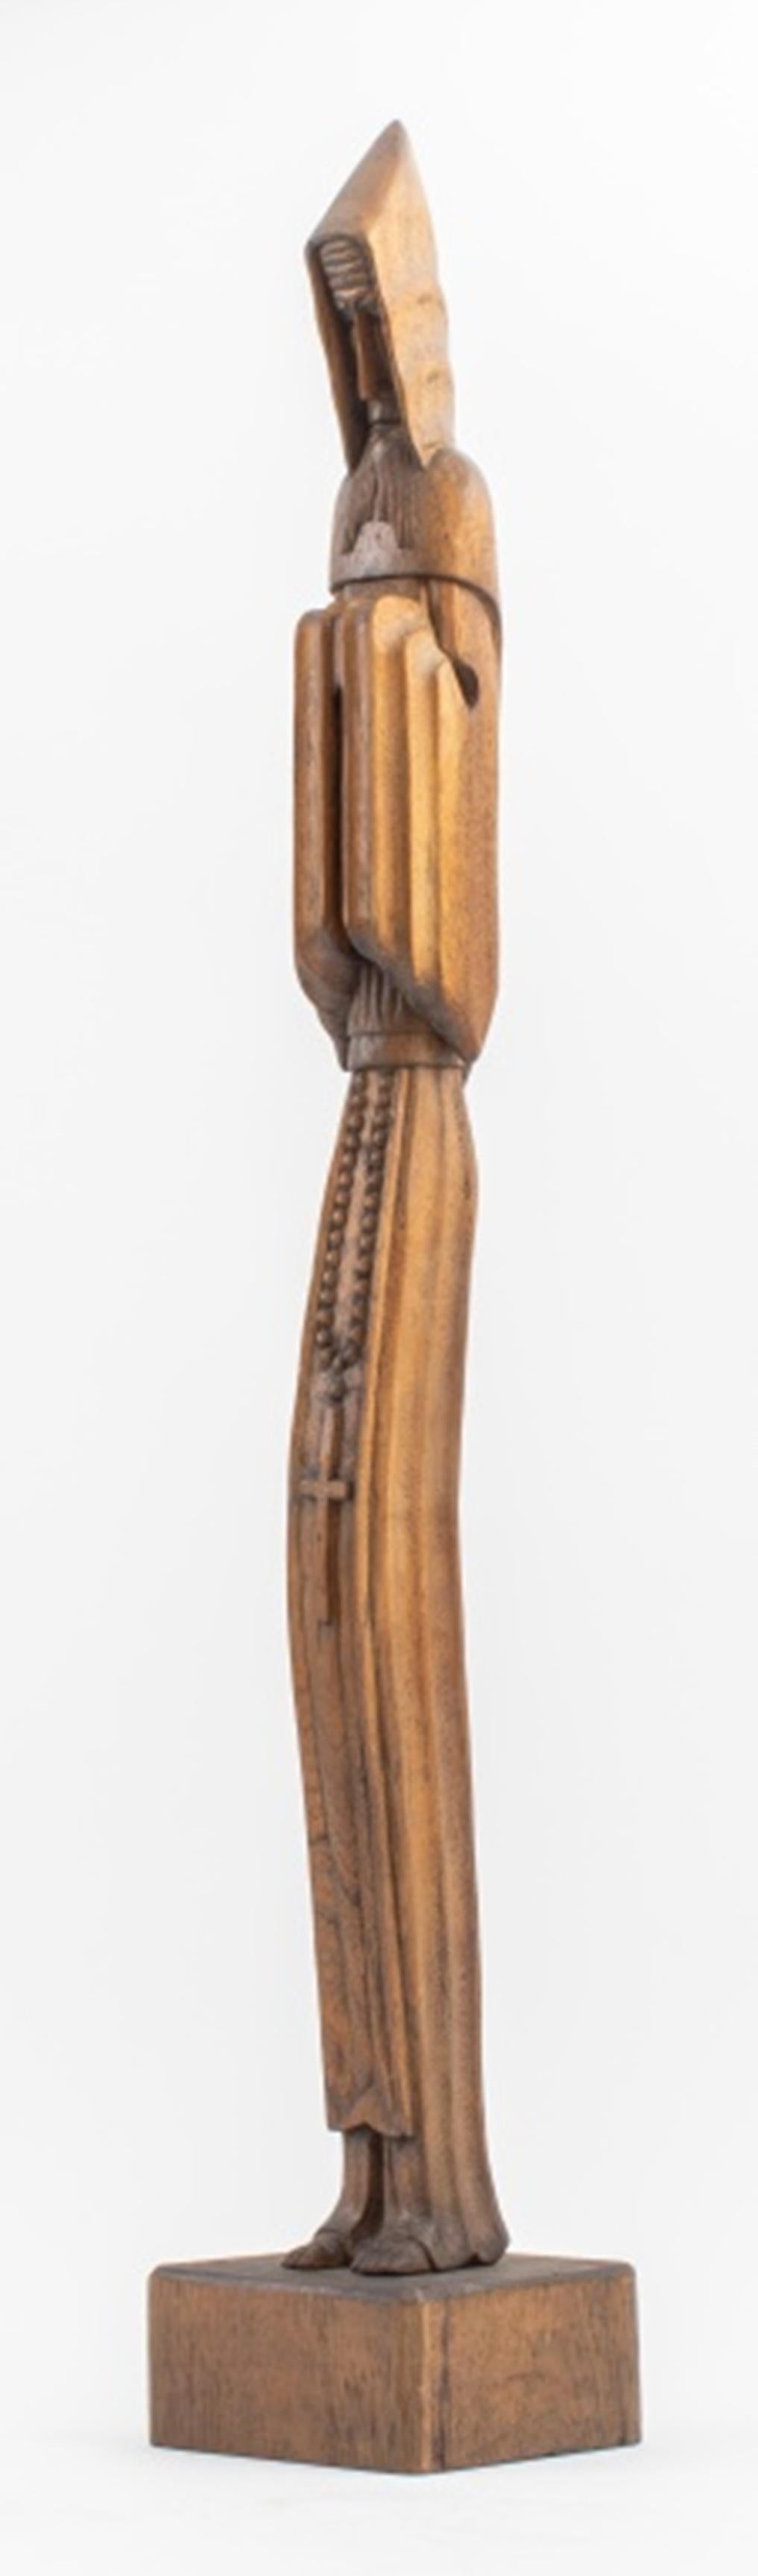 Modern carved wood statue sculpture of a standing priest or monk wearing a hooded robe and rosary, mounted on a square wood base, 